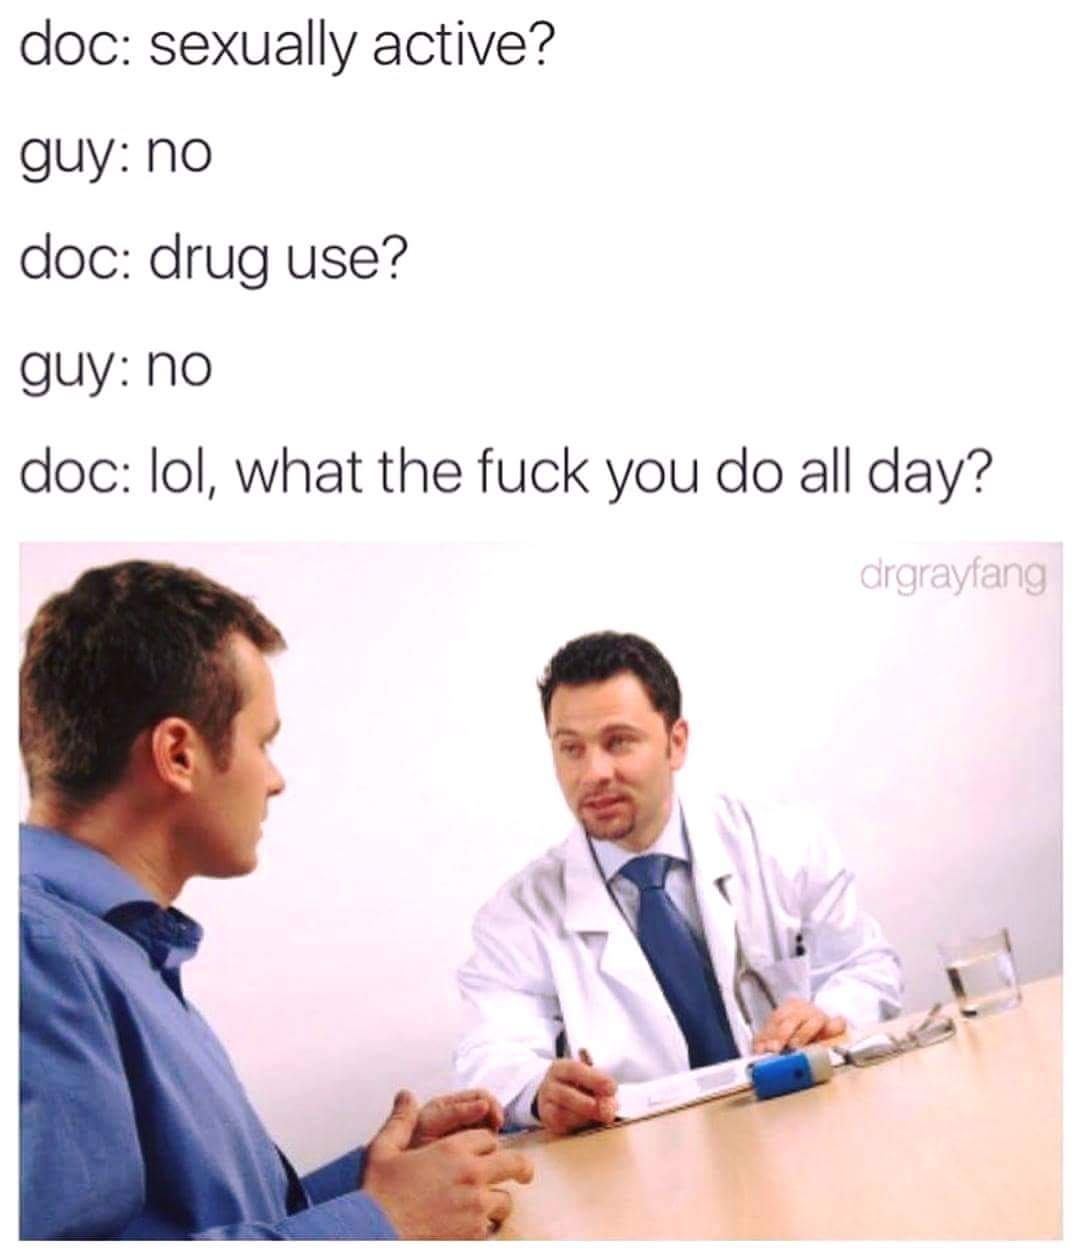 funny monday memes - doctor memes - doc sexually active? guy no doc drug use? guy no doc lol, what the fuck you do all day? drgrayfang